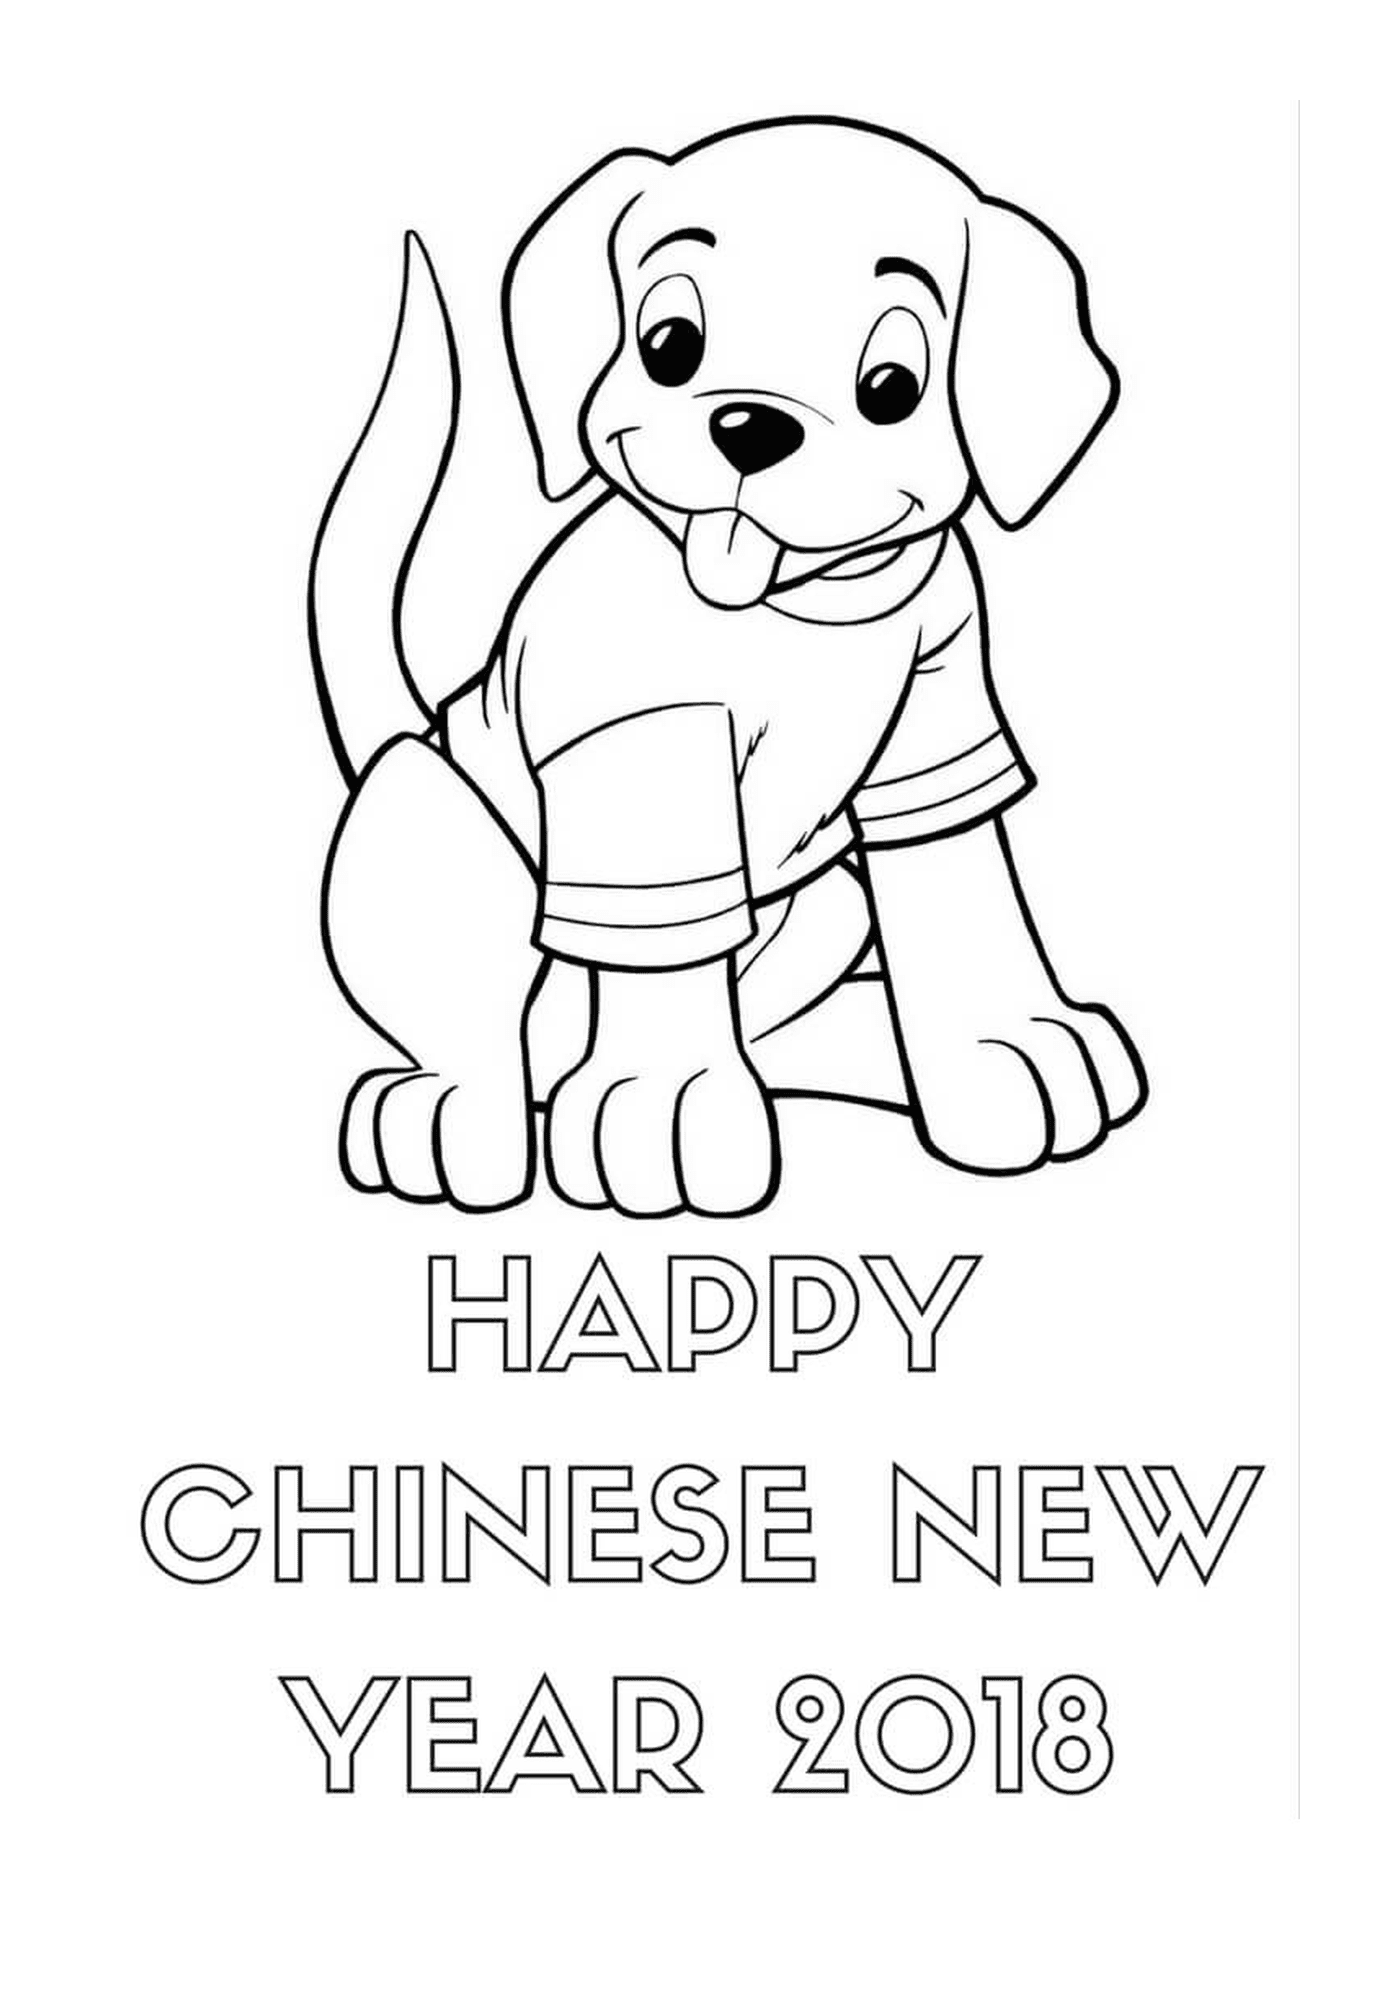 Happy nouvel an chinois 2018 Sheet